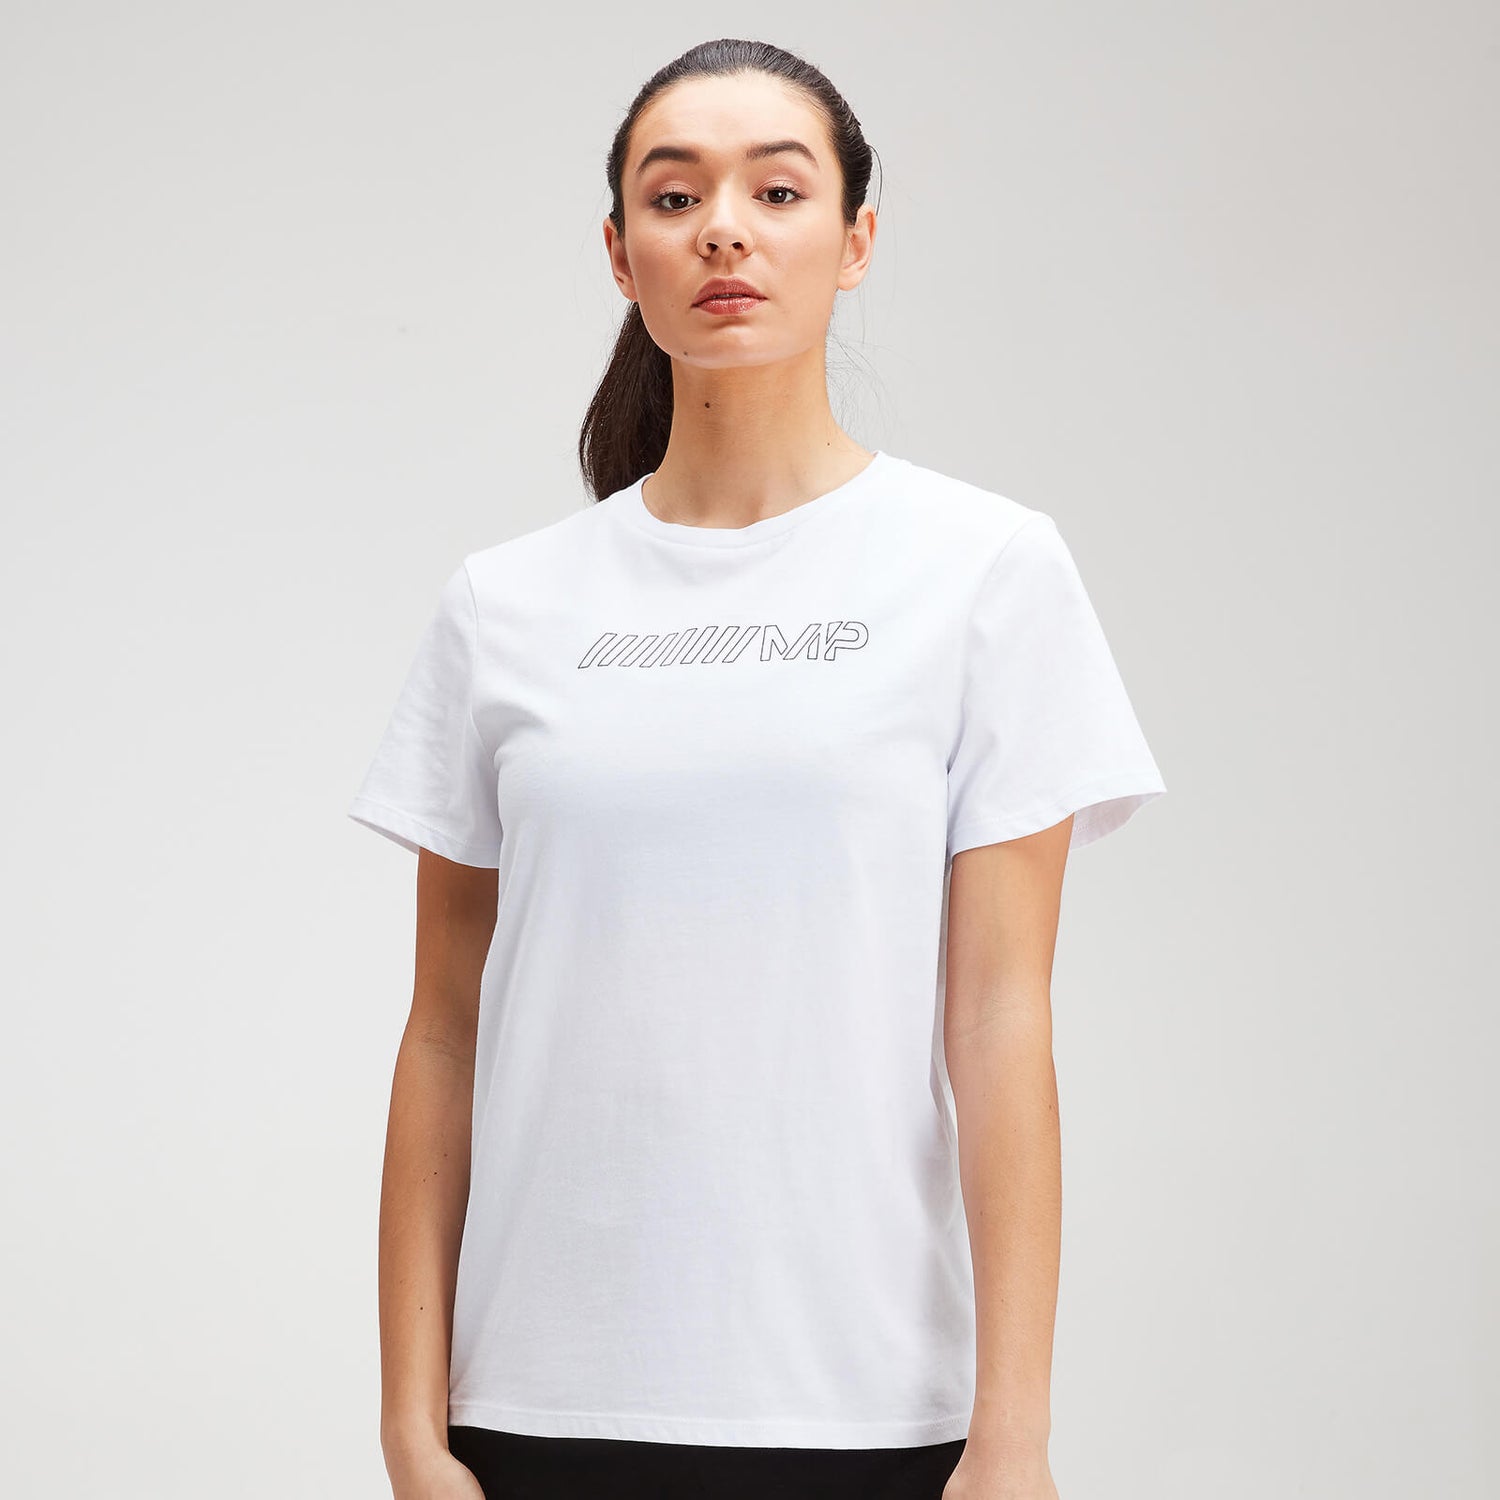 MP Women's Outline Graphic T-Shirt - White